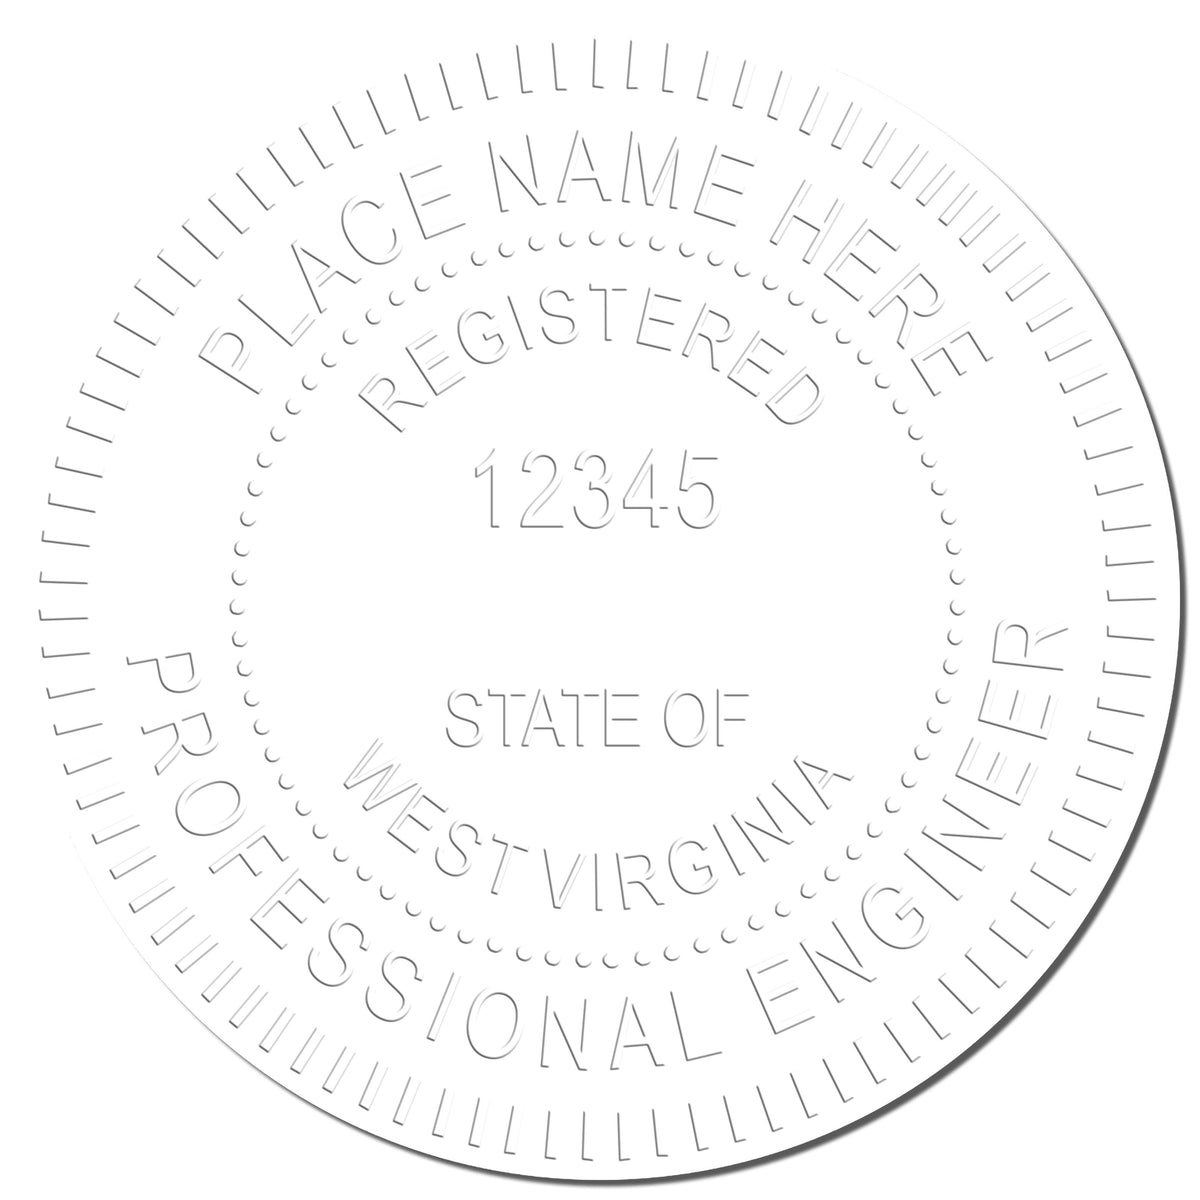 The Soft West Virginia Professional Engineer Seal stamp impression comes to life with a crisp, detailed photo on paper - showcasing true professional quality.